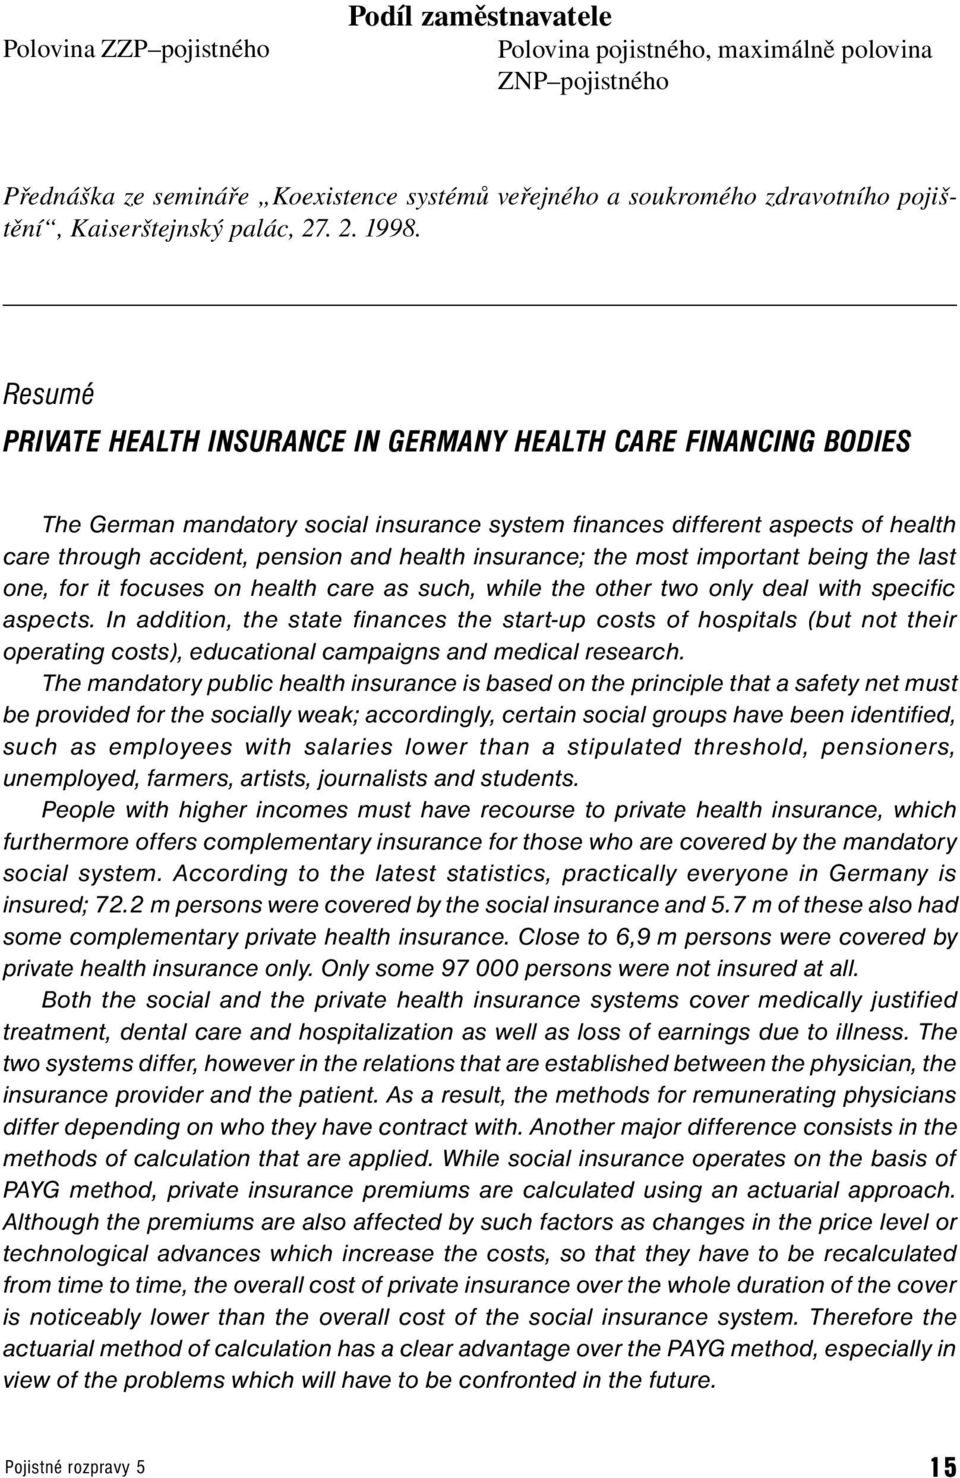 Resumé PRIVATE HEALTH INSURANCE IN GERMANY HEALTH CARE FINANCING BODIES The German mandaory social insurance sysem finances differen aspecs of healh care hrough acciden, pension and healh insurance;